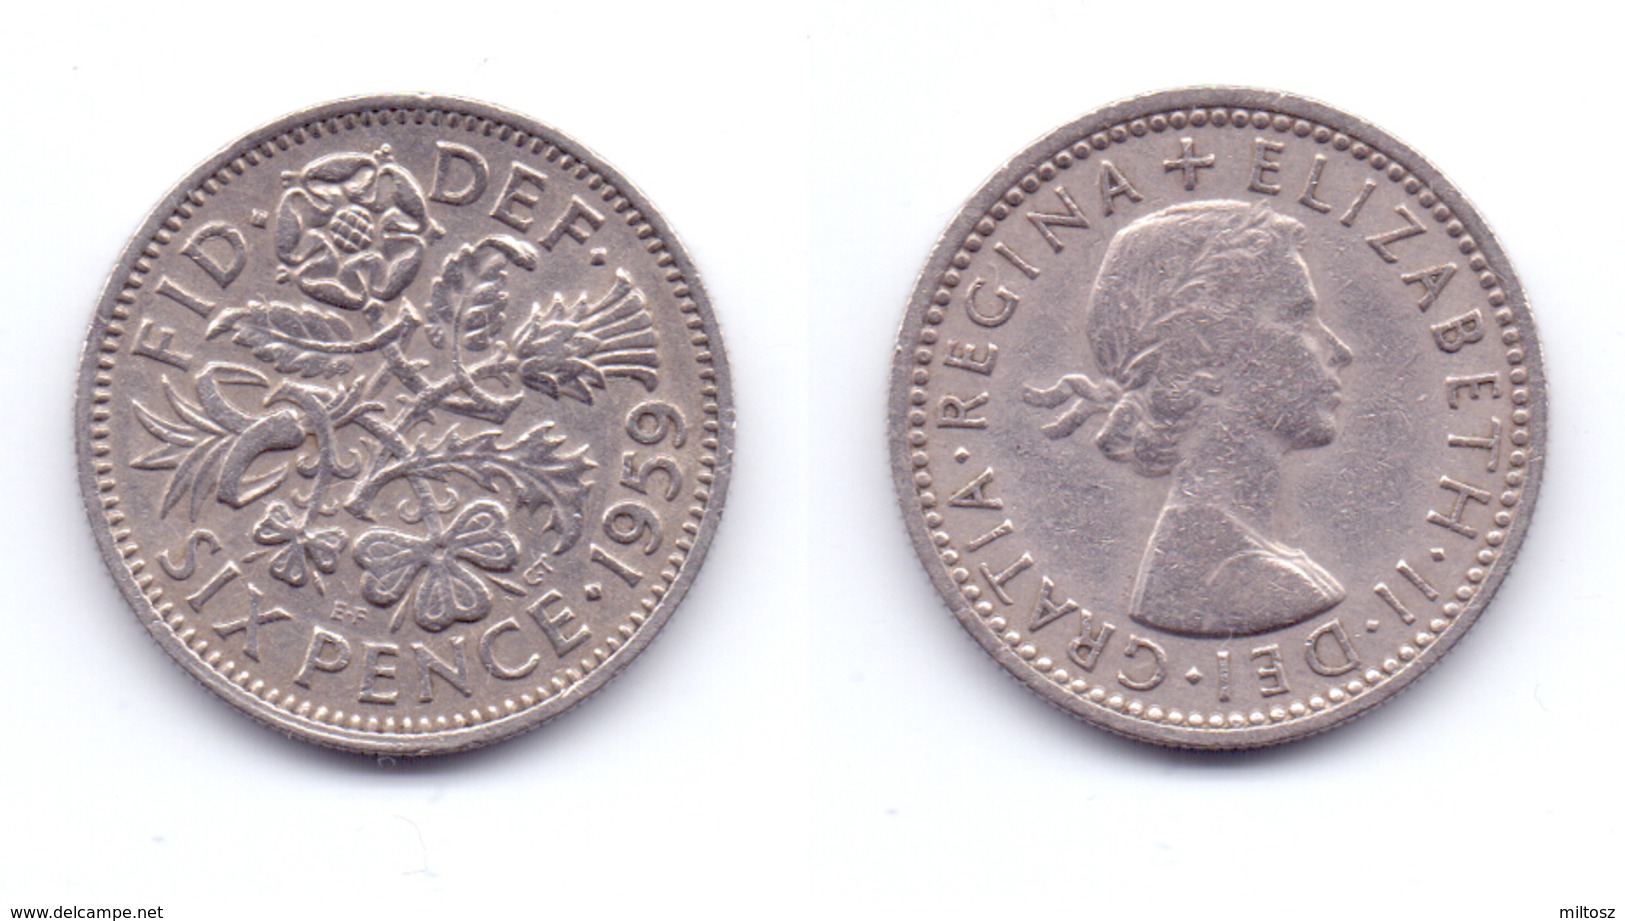 Great Britain 6 Pence 1959 - H. 6 Pence